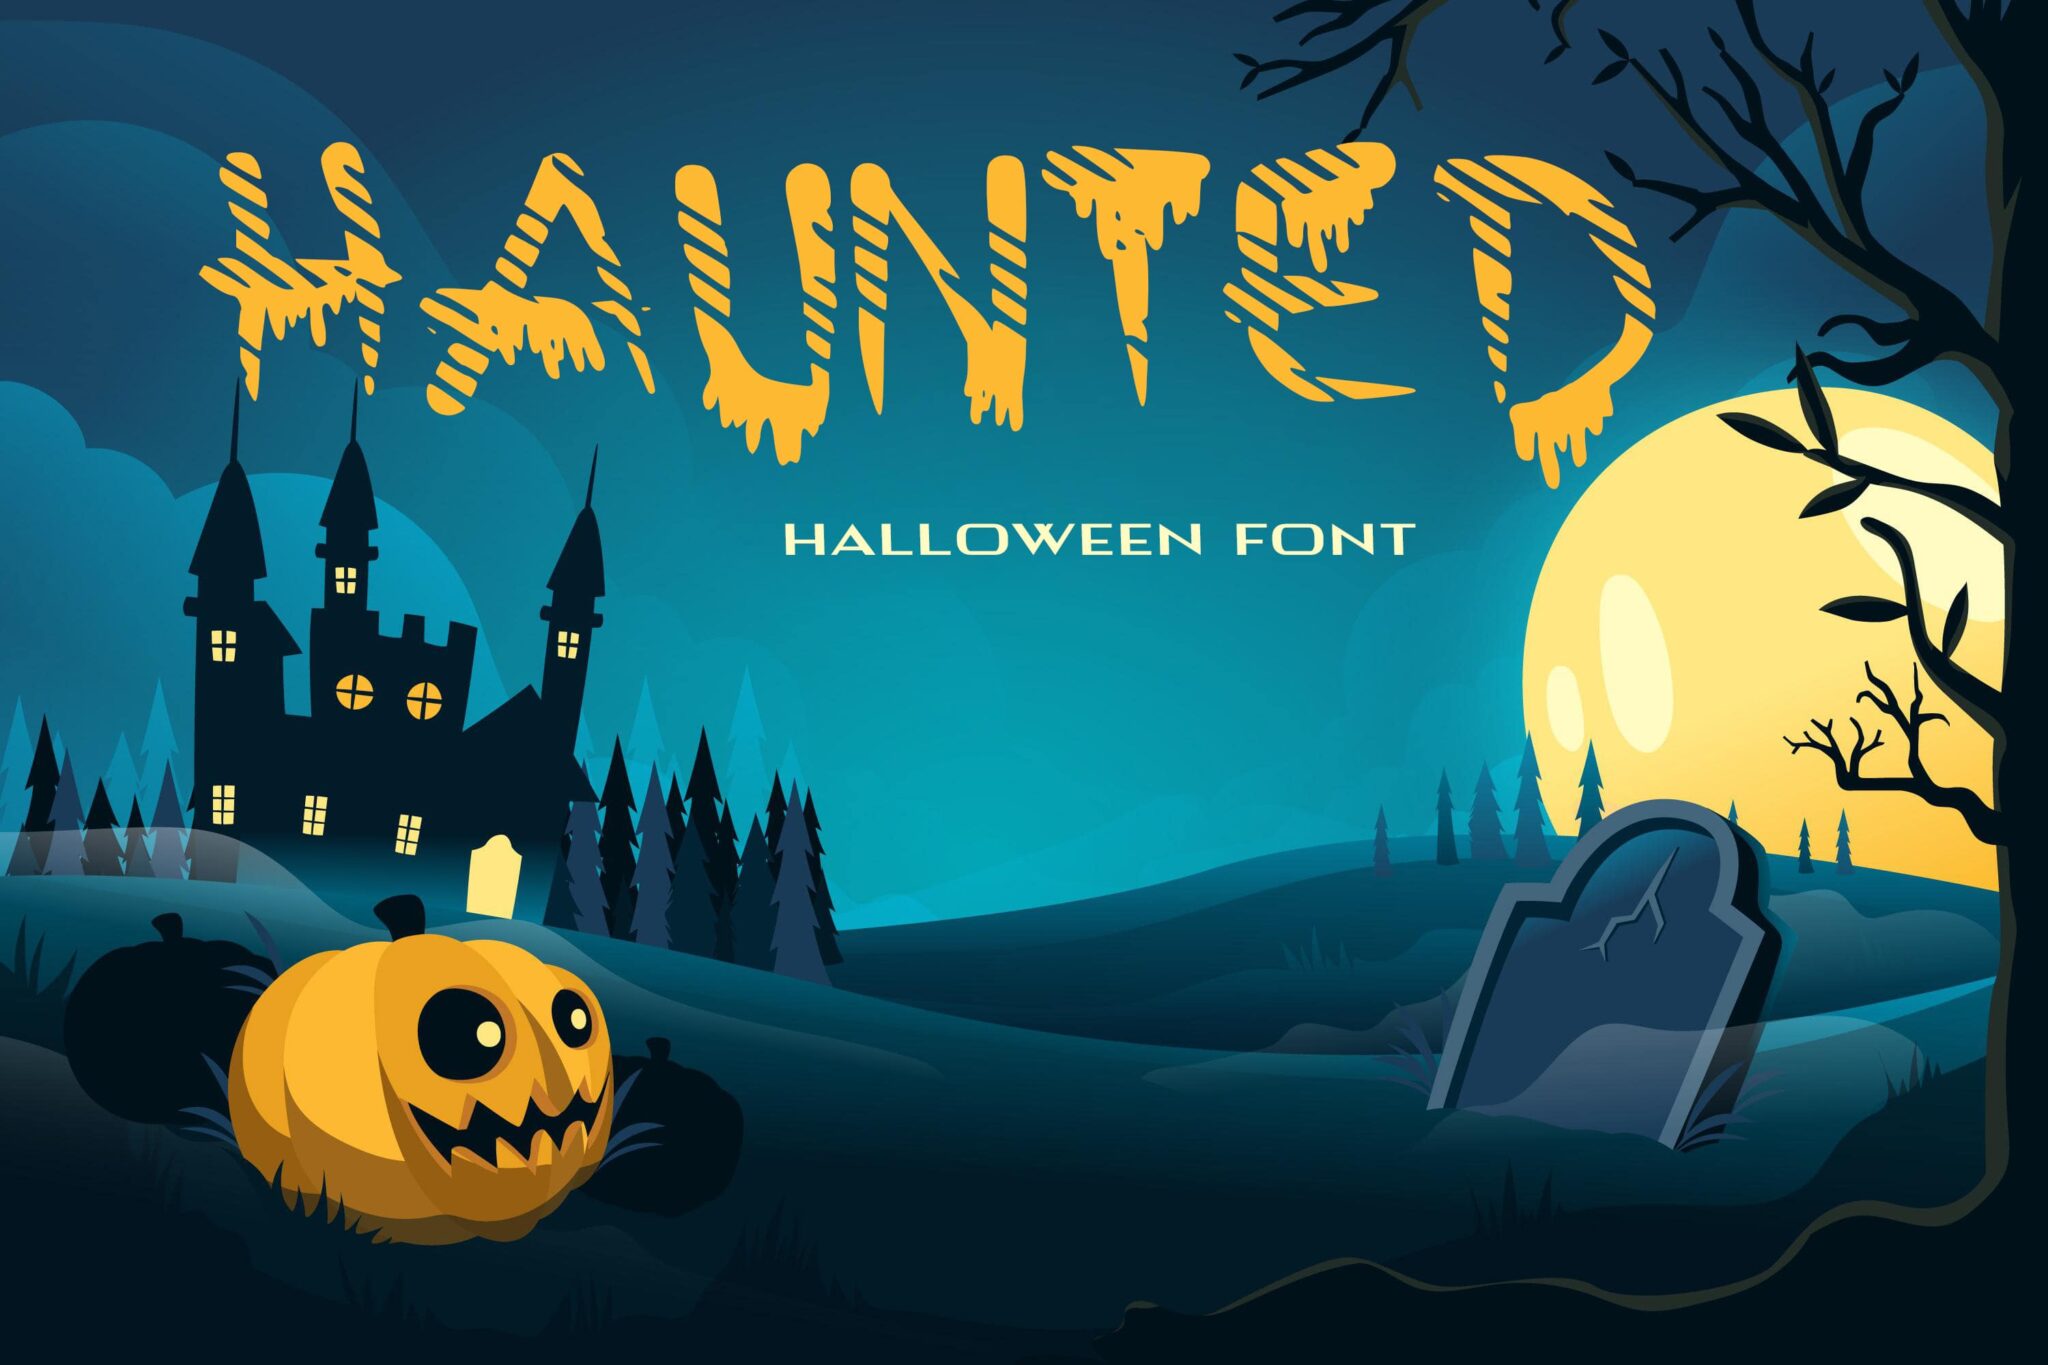 Yellow grunge font on a Halloween background.